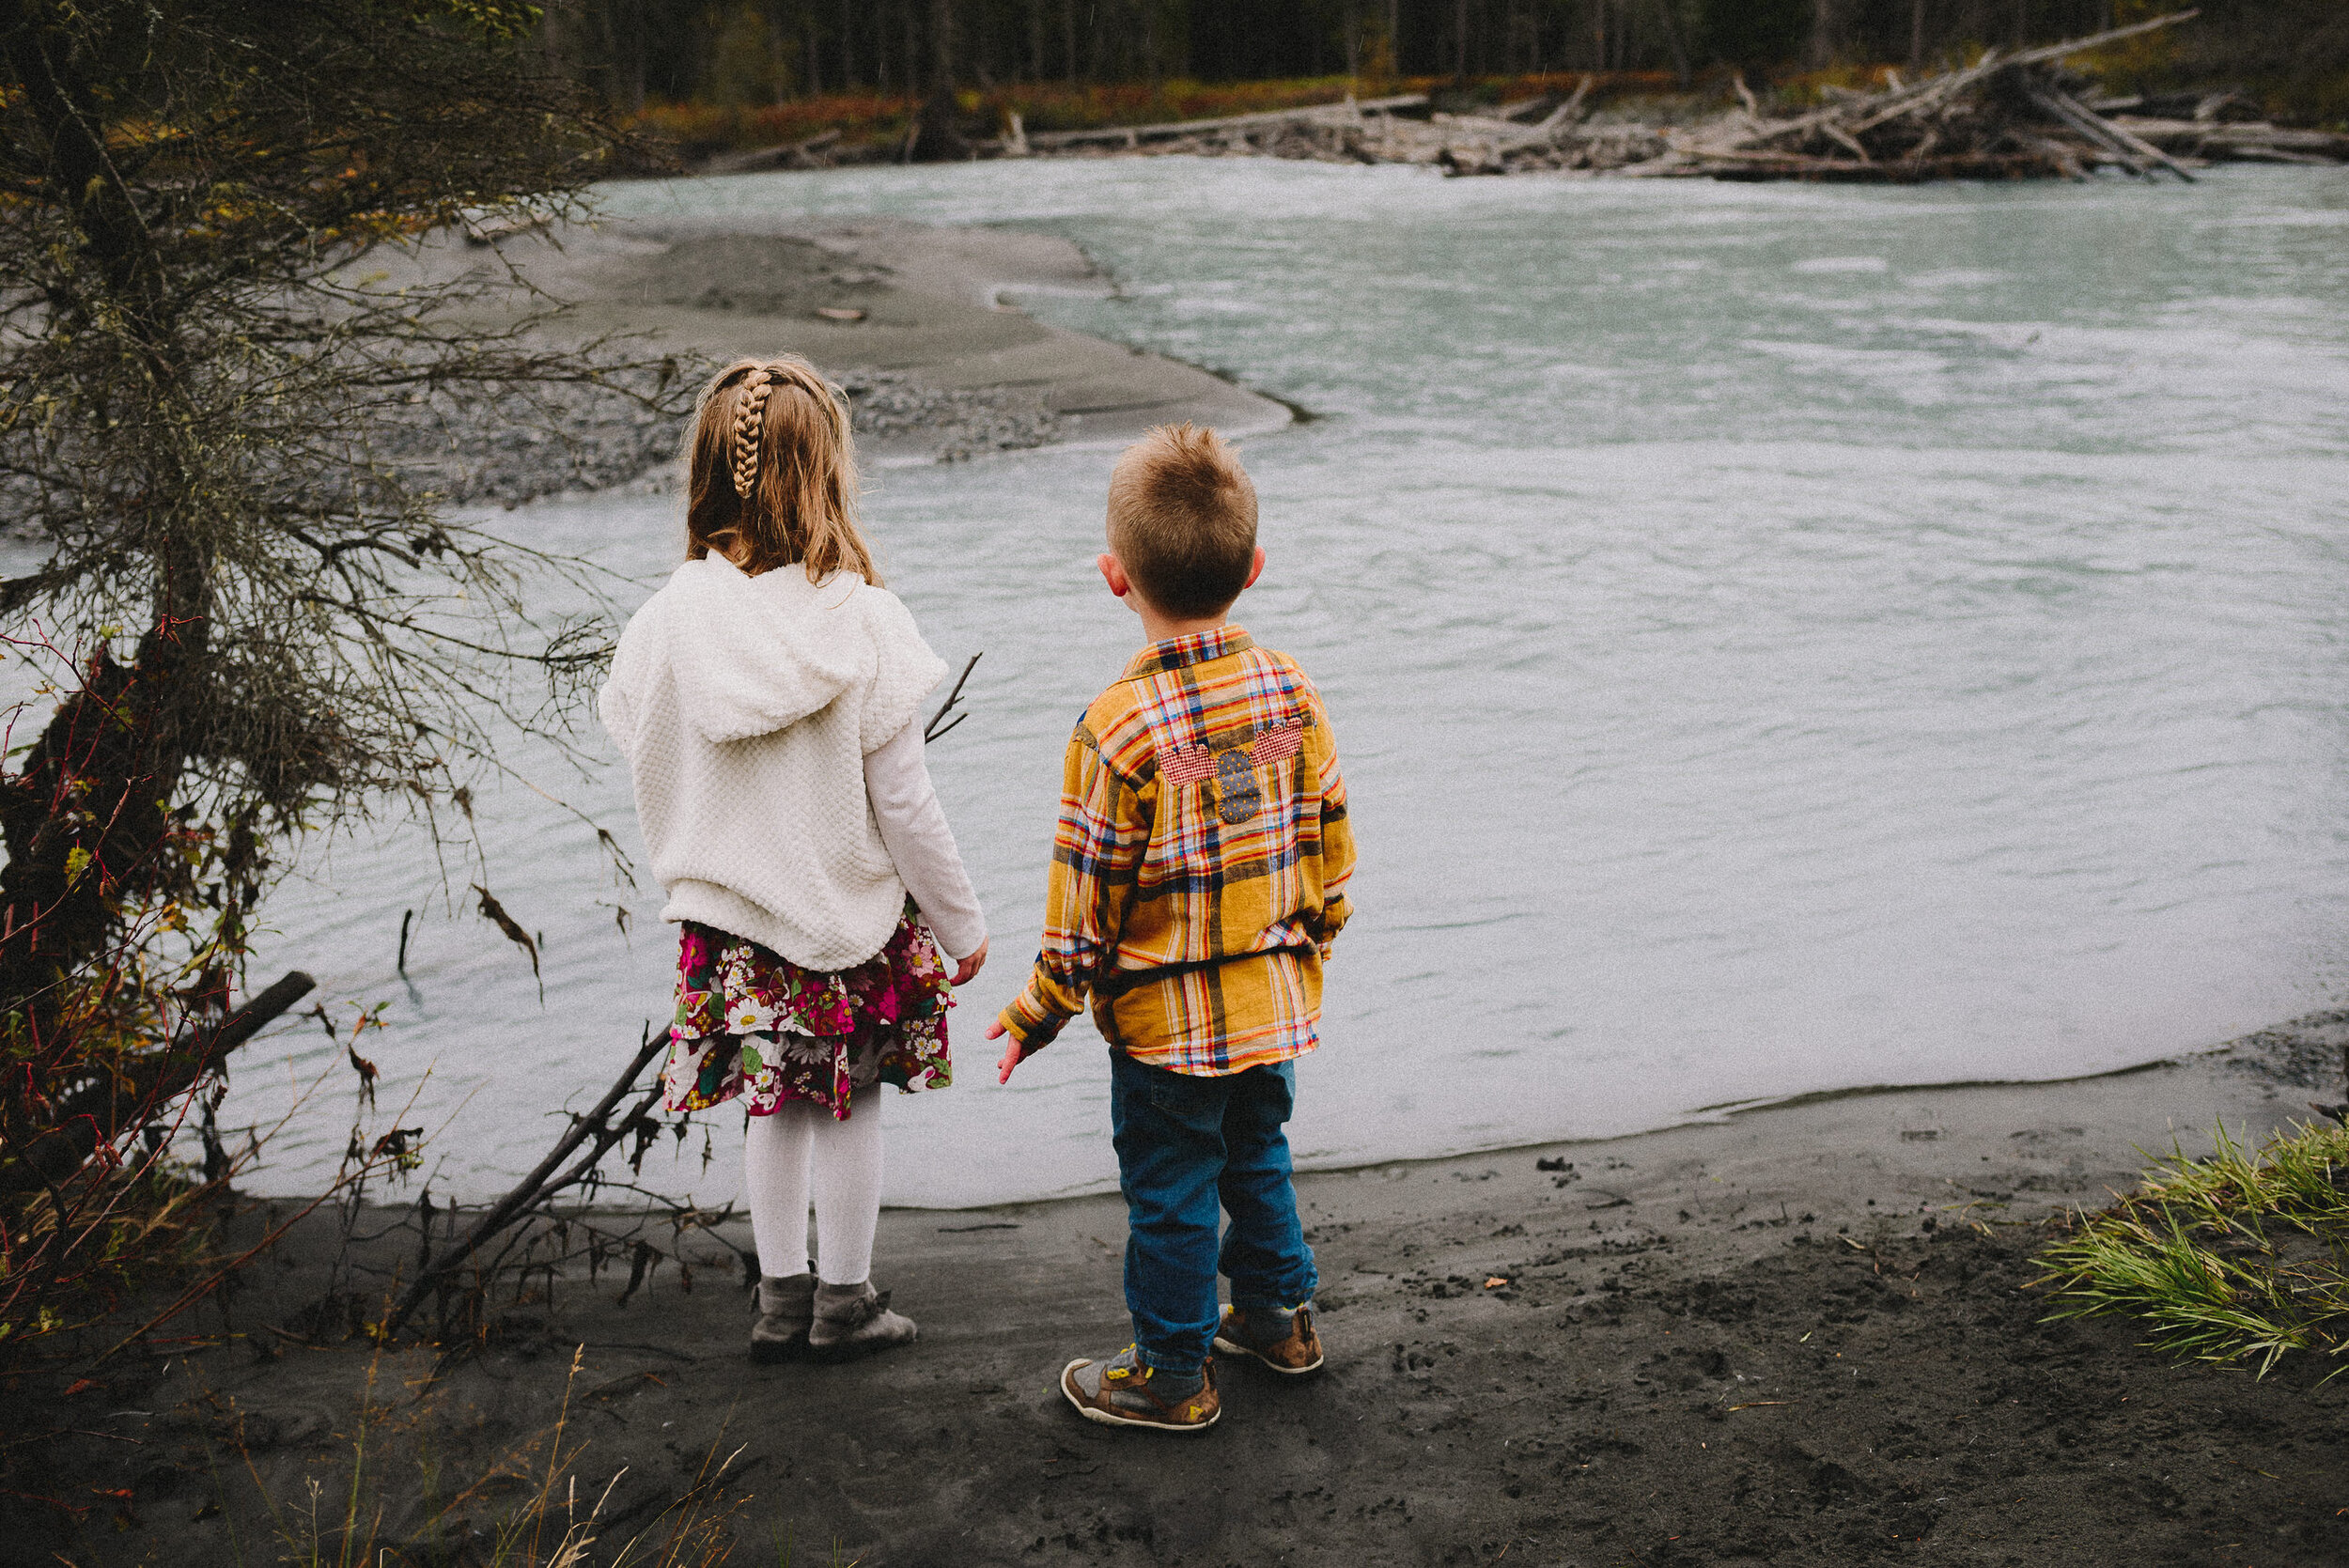 north-fork-eagle-river-fall-family-session-alaska-photographer-way-up-north-photography (117).jpg